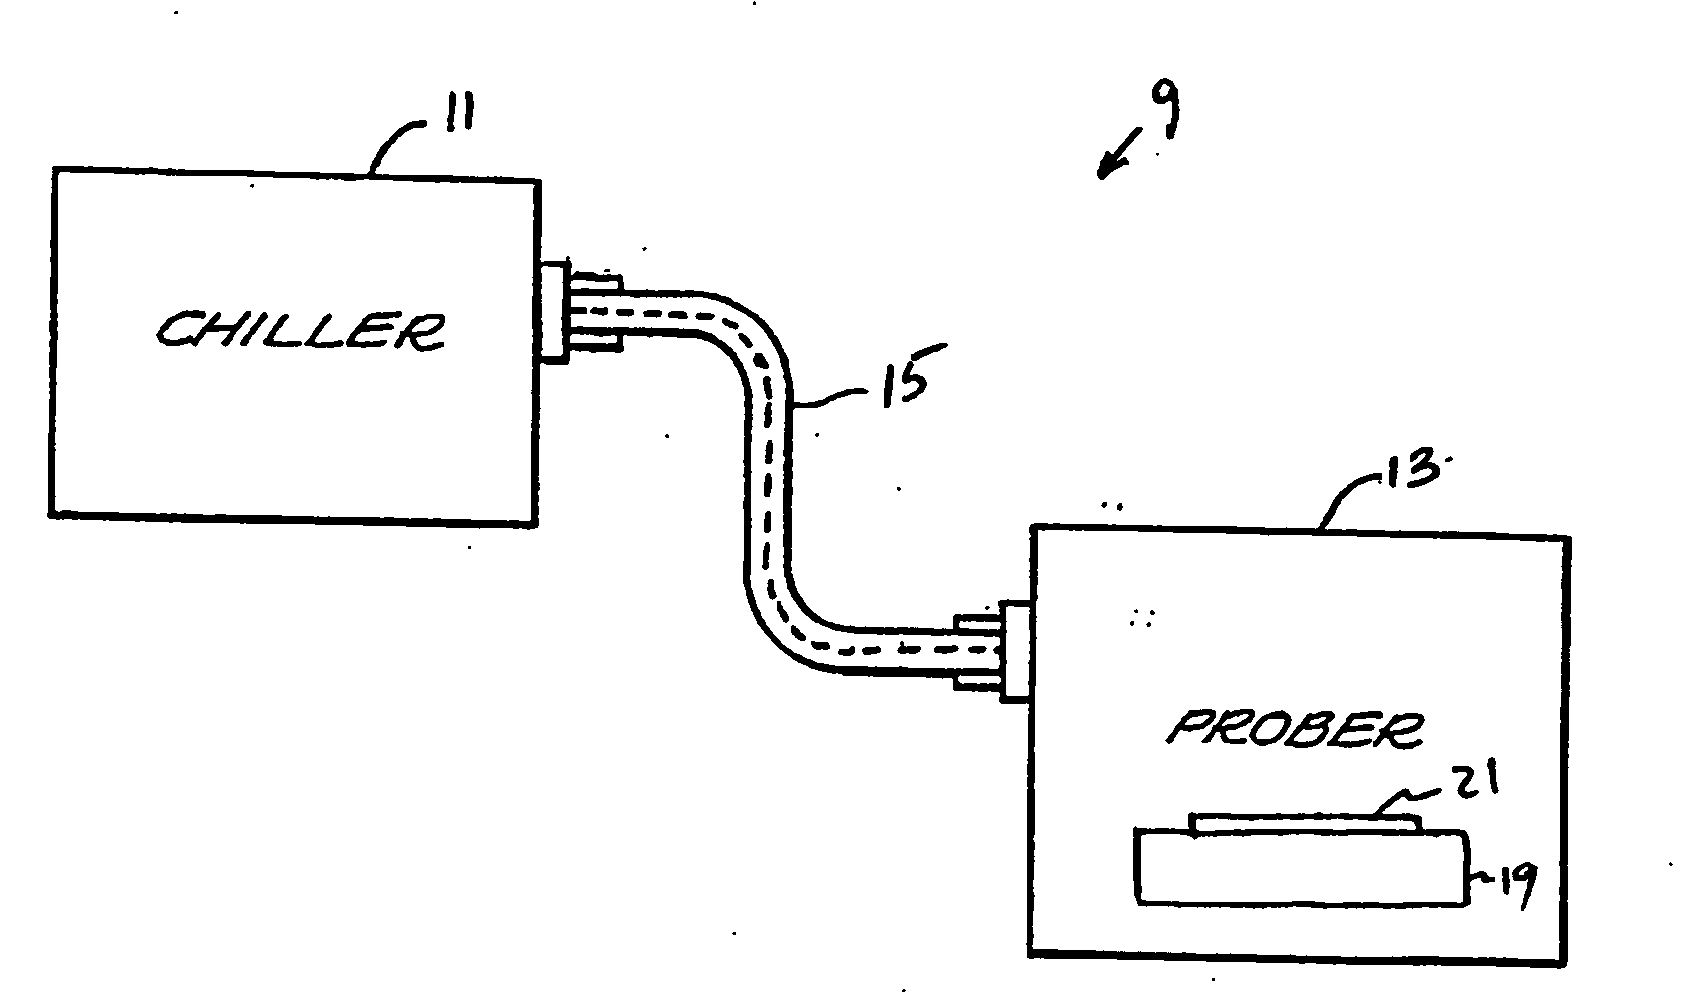 Apparatus and method for reducing electrical noise in a thermally controlled chuck